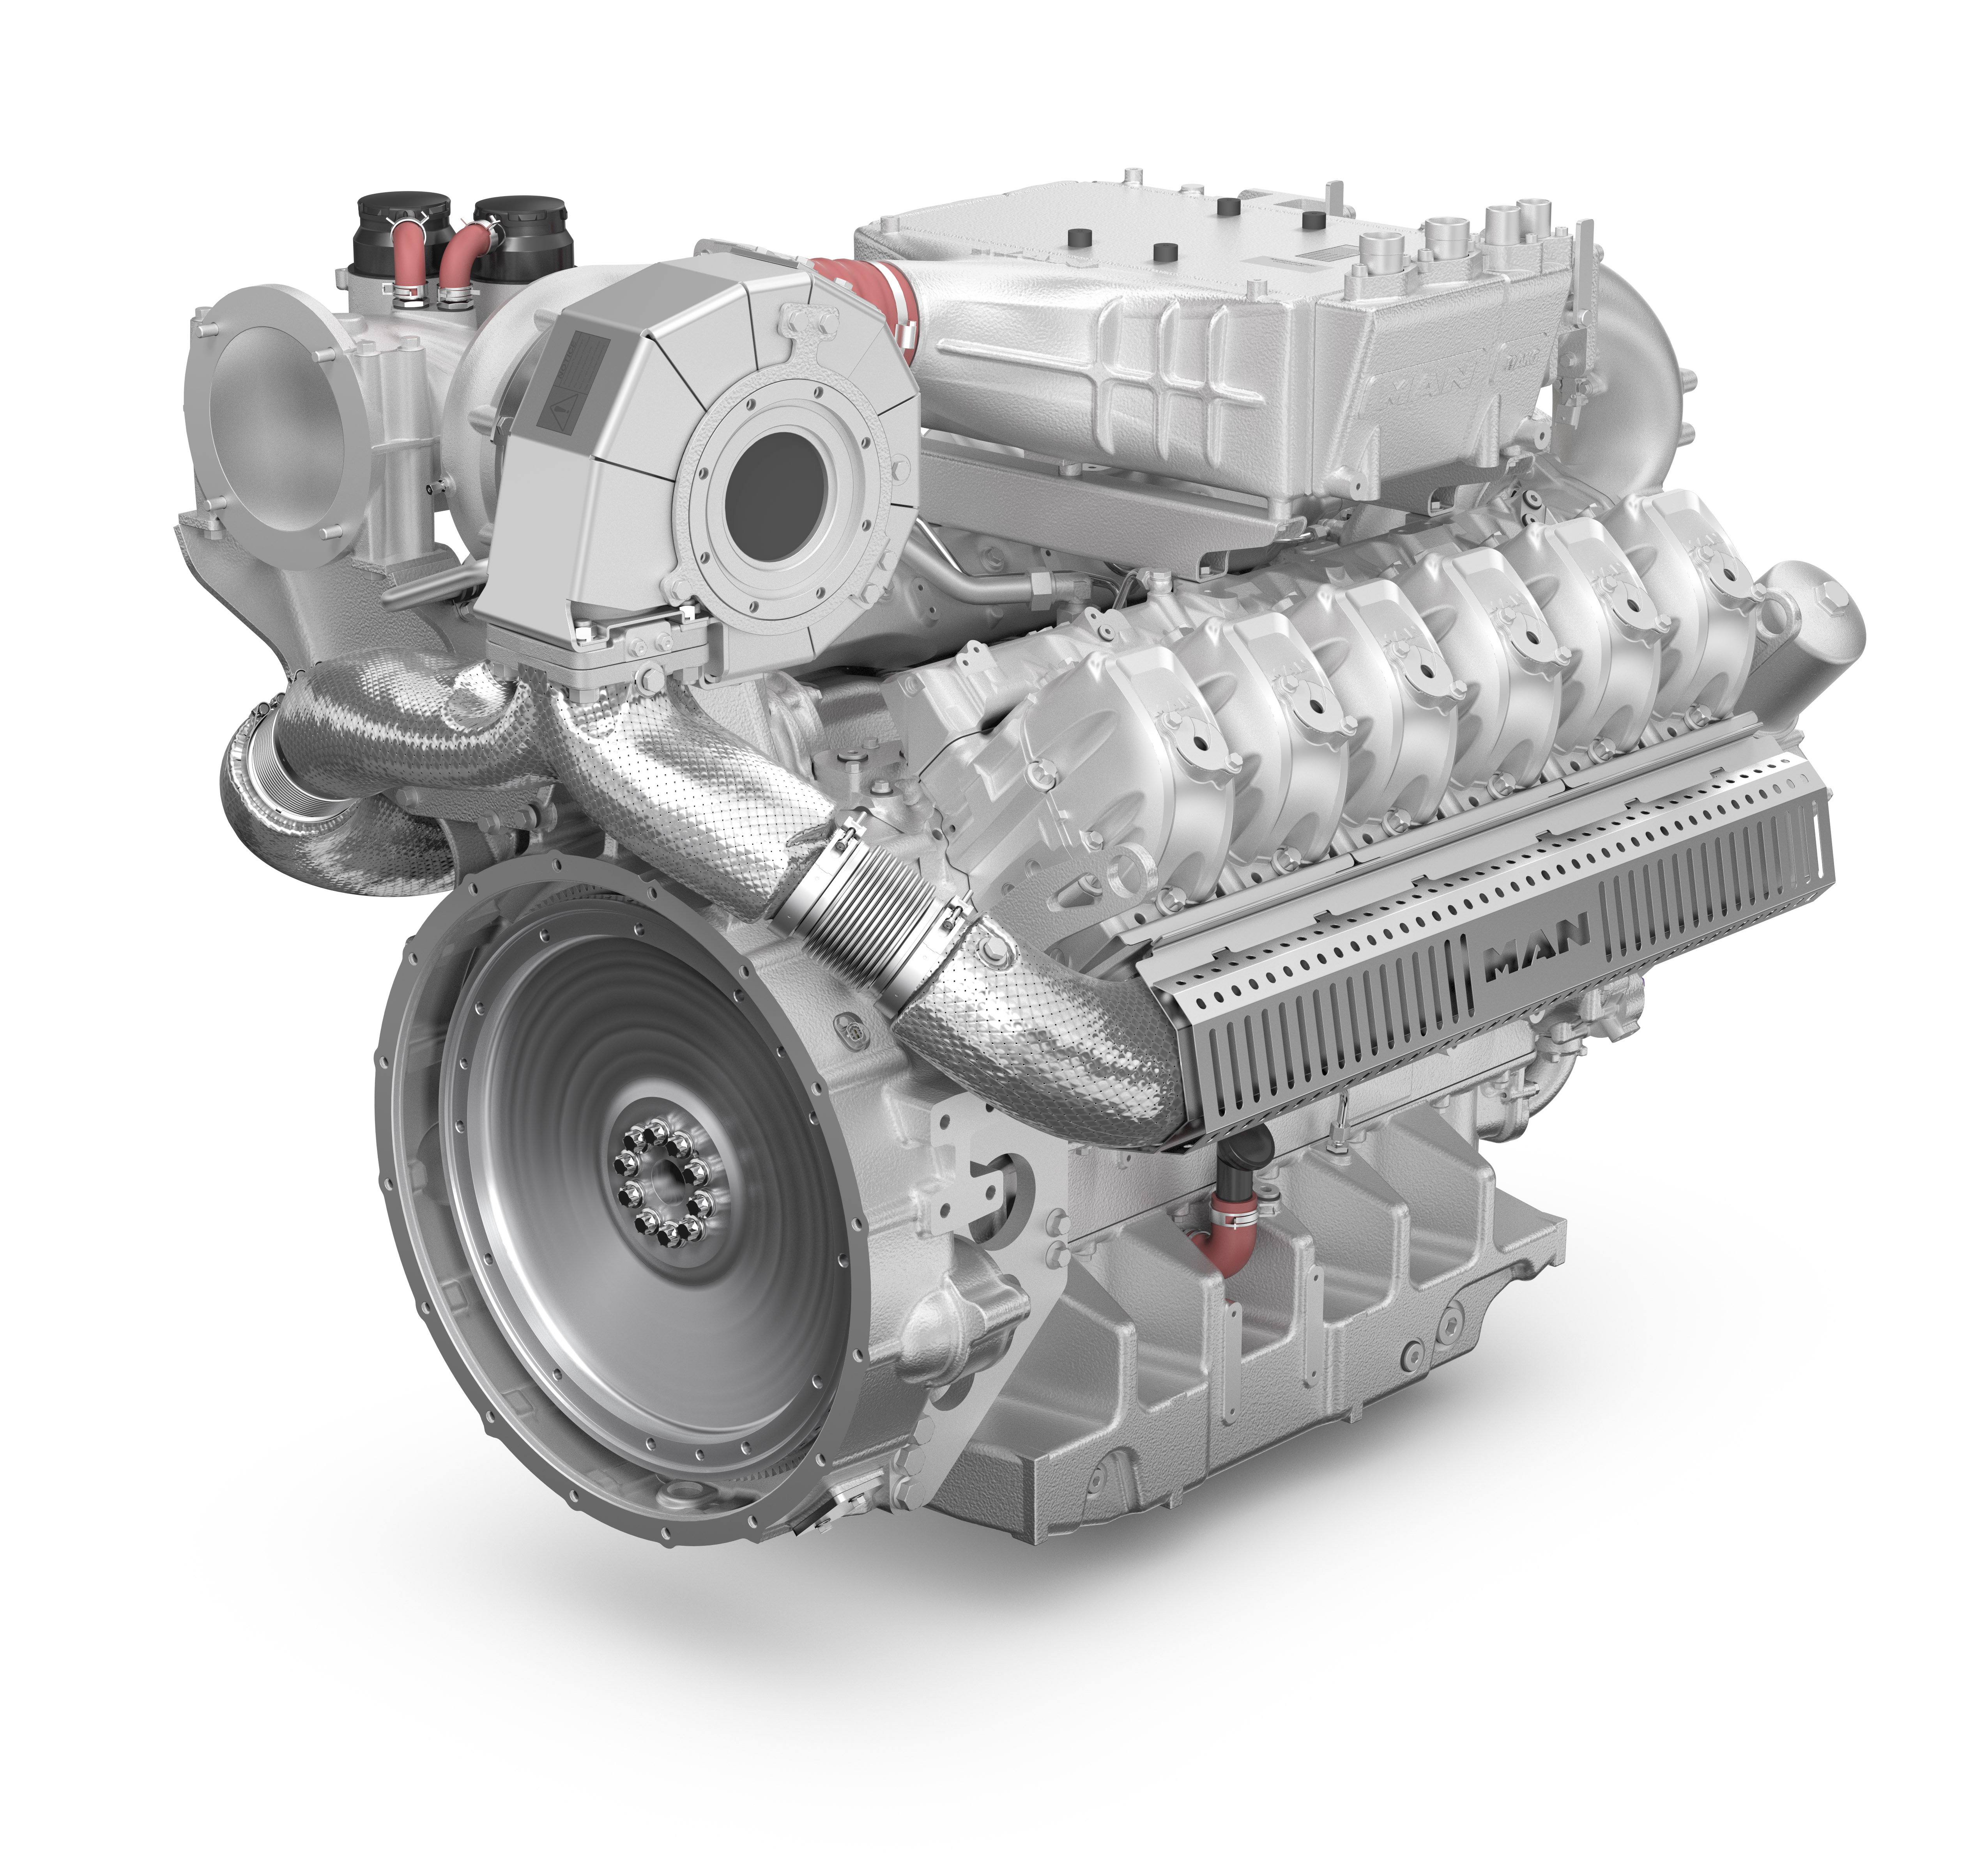 New MAN E3872 gas engine with 44.0% efficiency and 735 kW power 